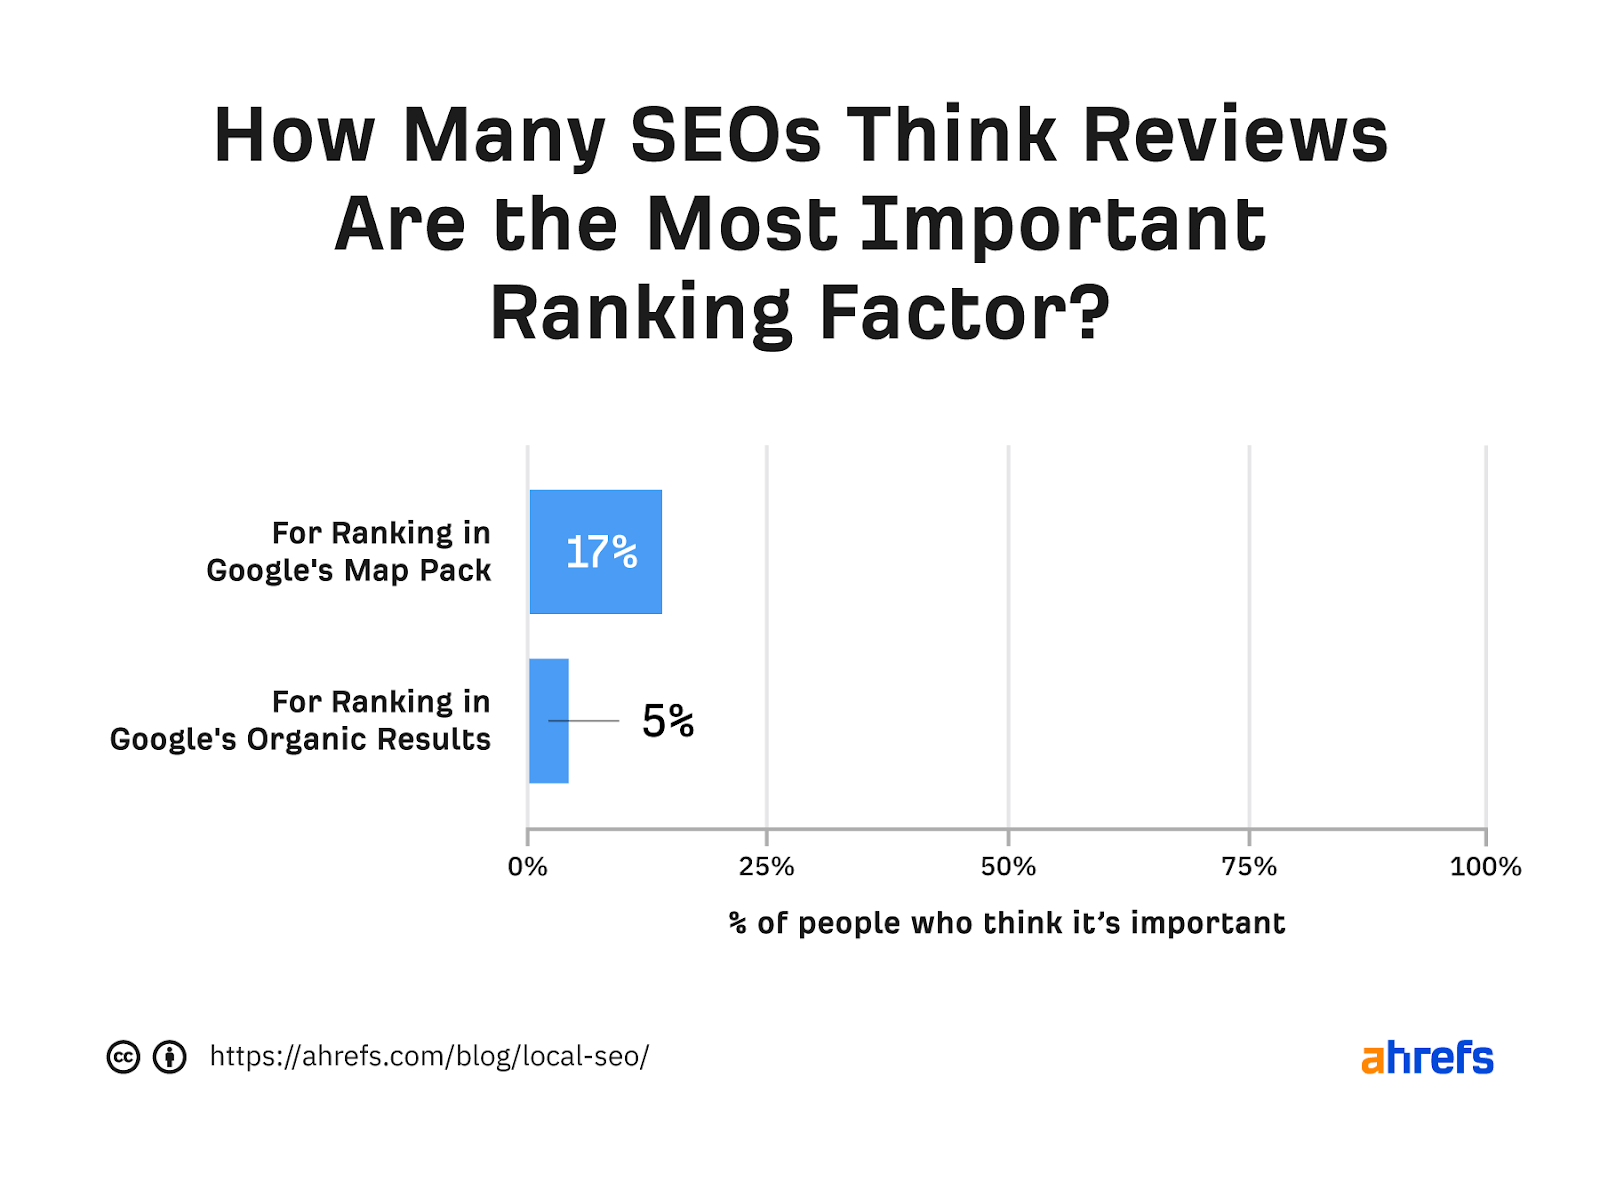 How many SEOs think reviews are most important ranking factor